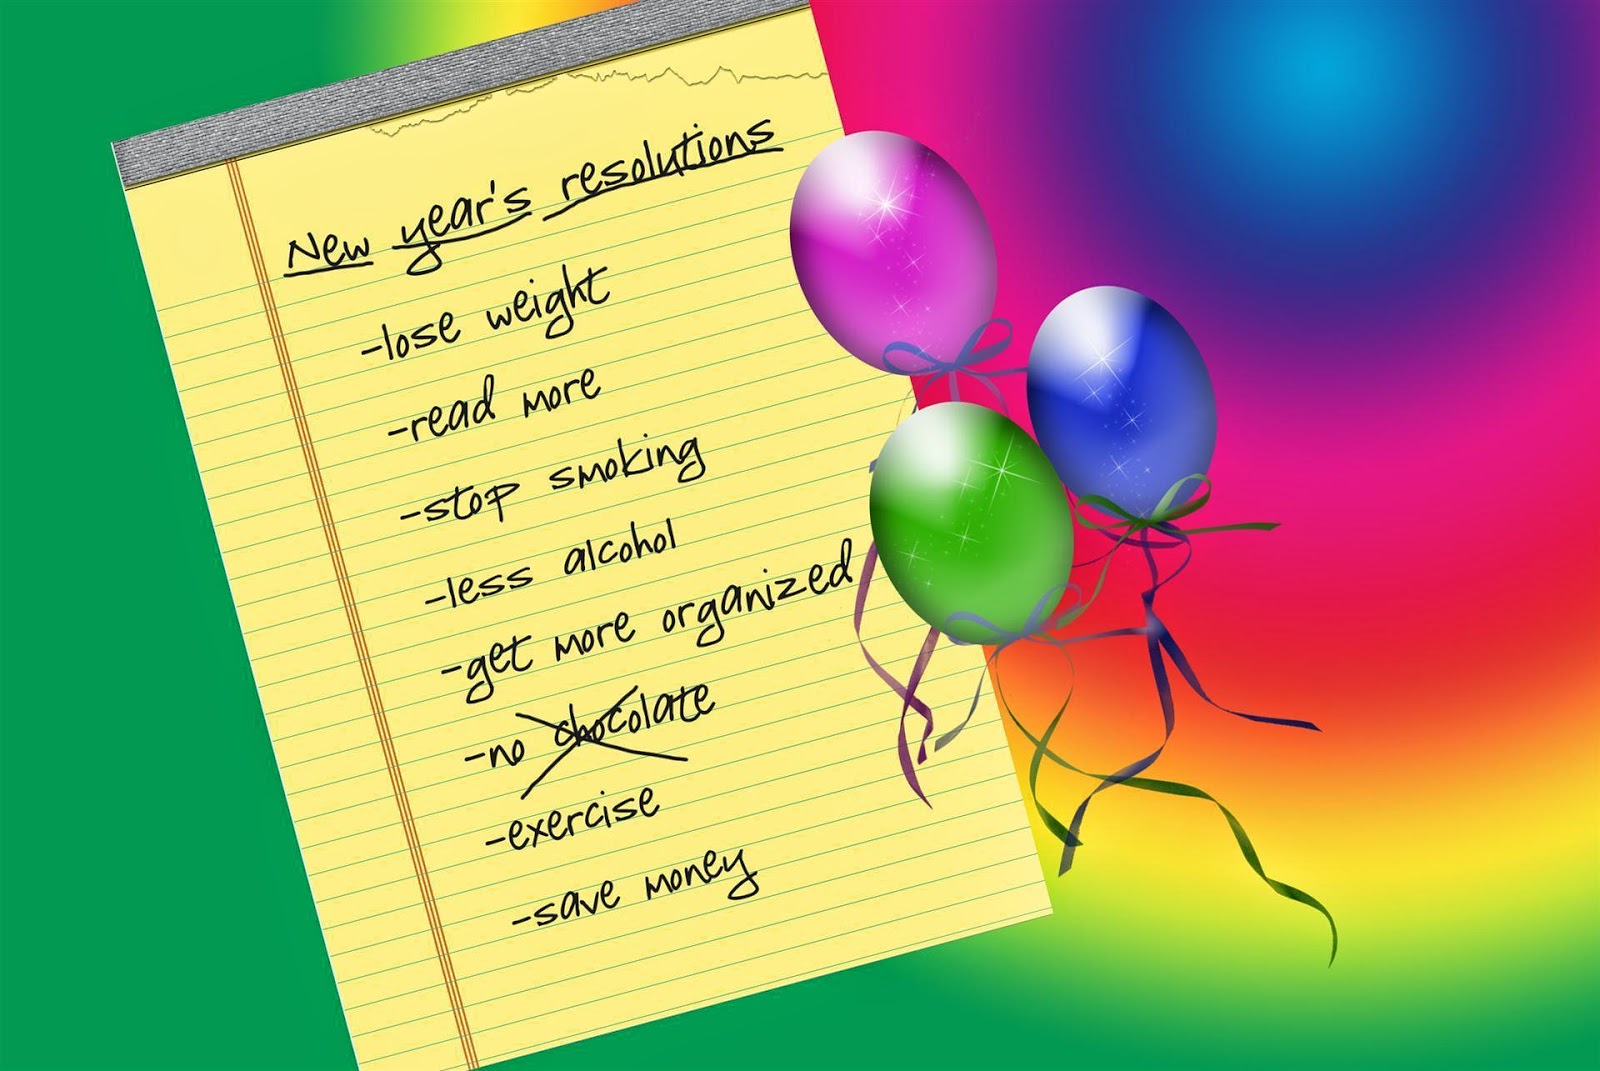 happy new year resolution images 